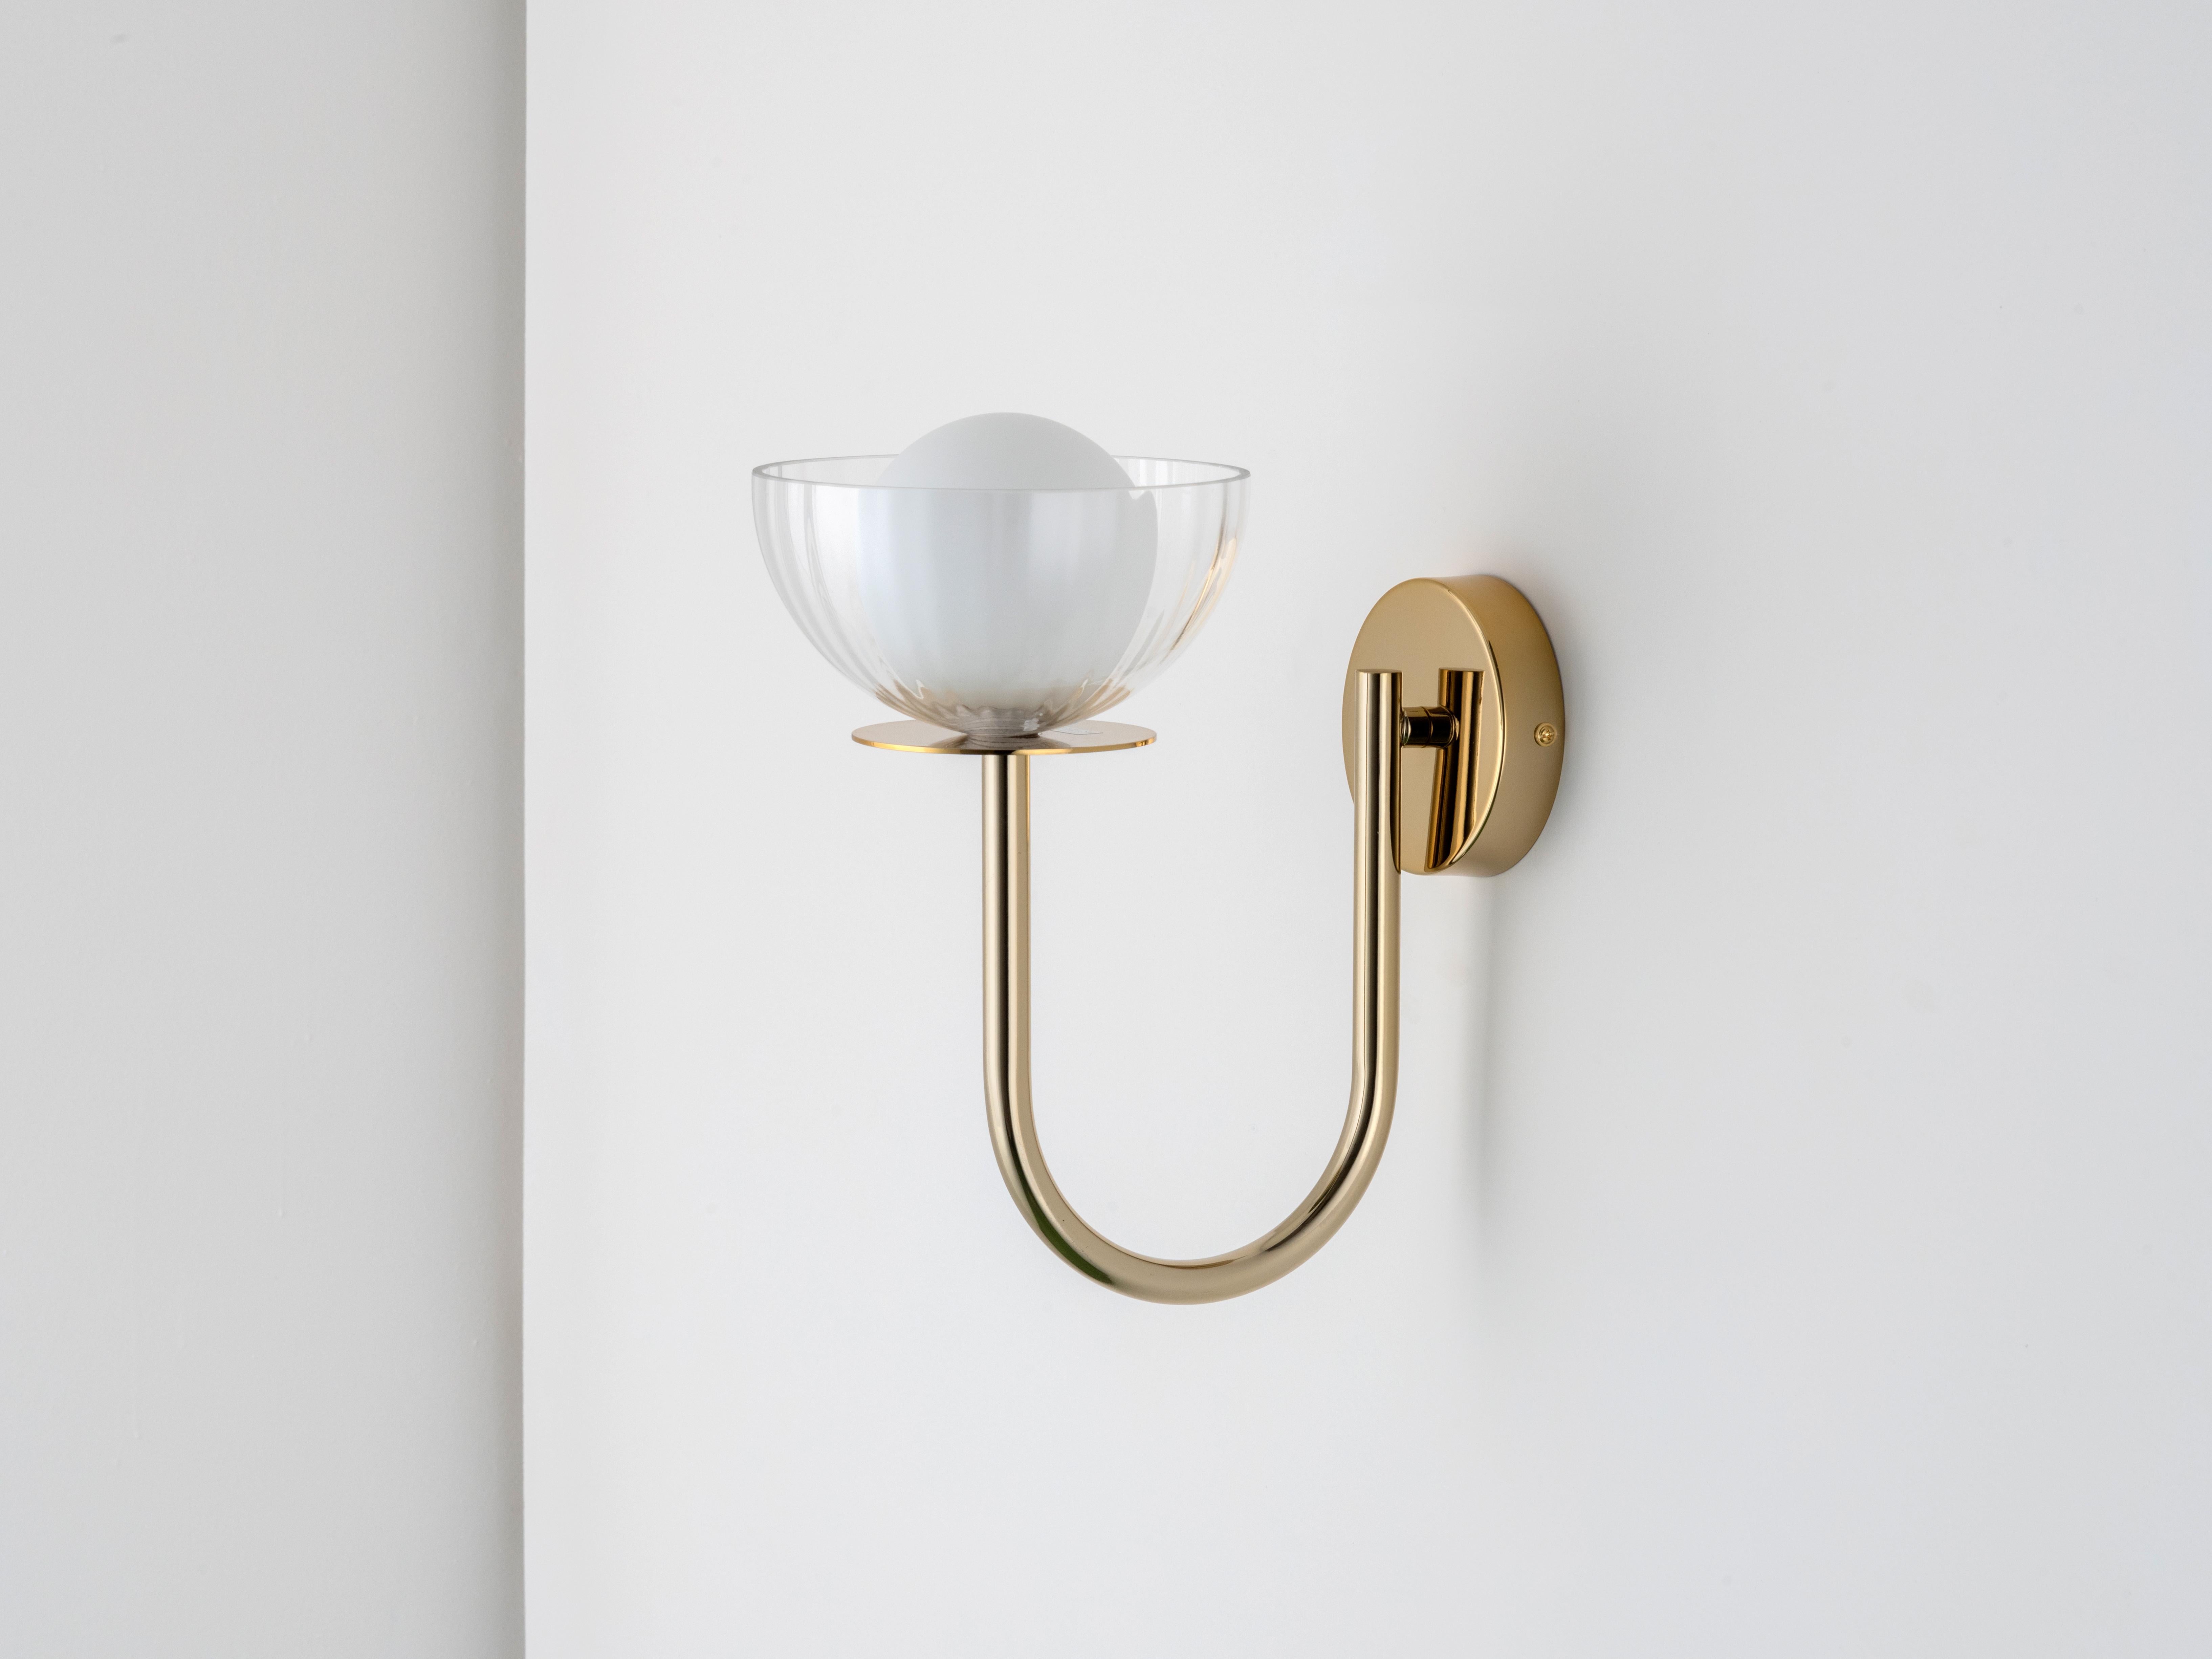 An elegant curved metal arm raises a clear ribbed glass bowl a top a luxurious brass plate to create this slender, space saving yet stylish wall mounted light. Within the bowl, our iconic opal orb glass shade, combining shapes and finishes into a